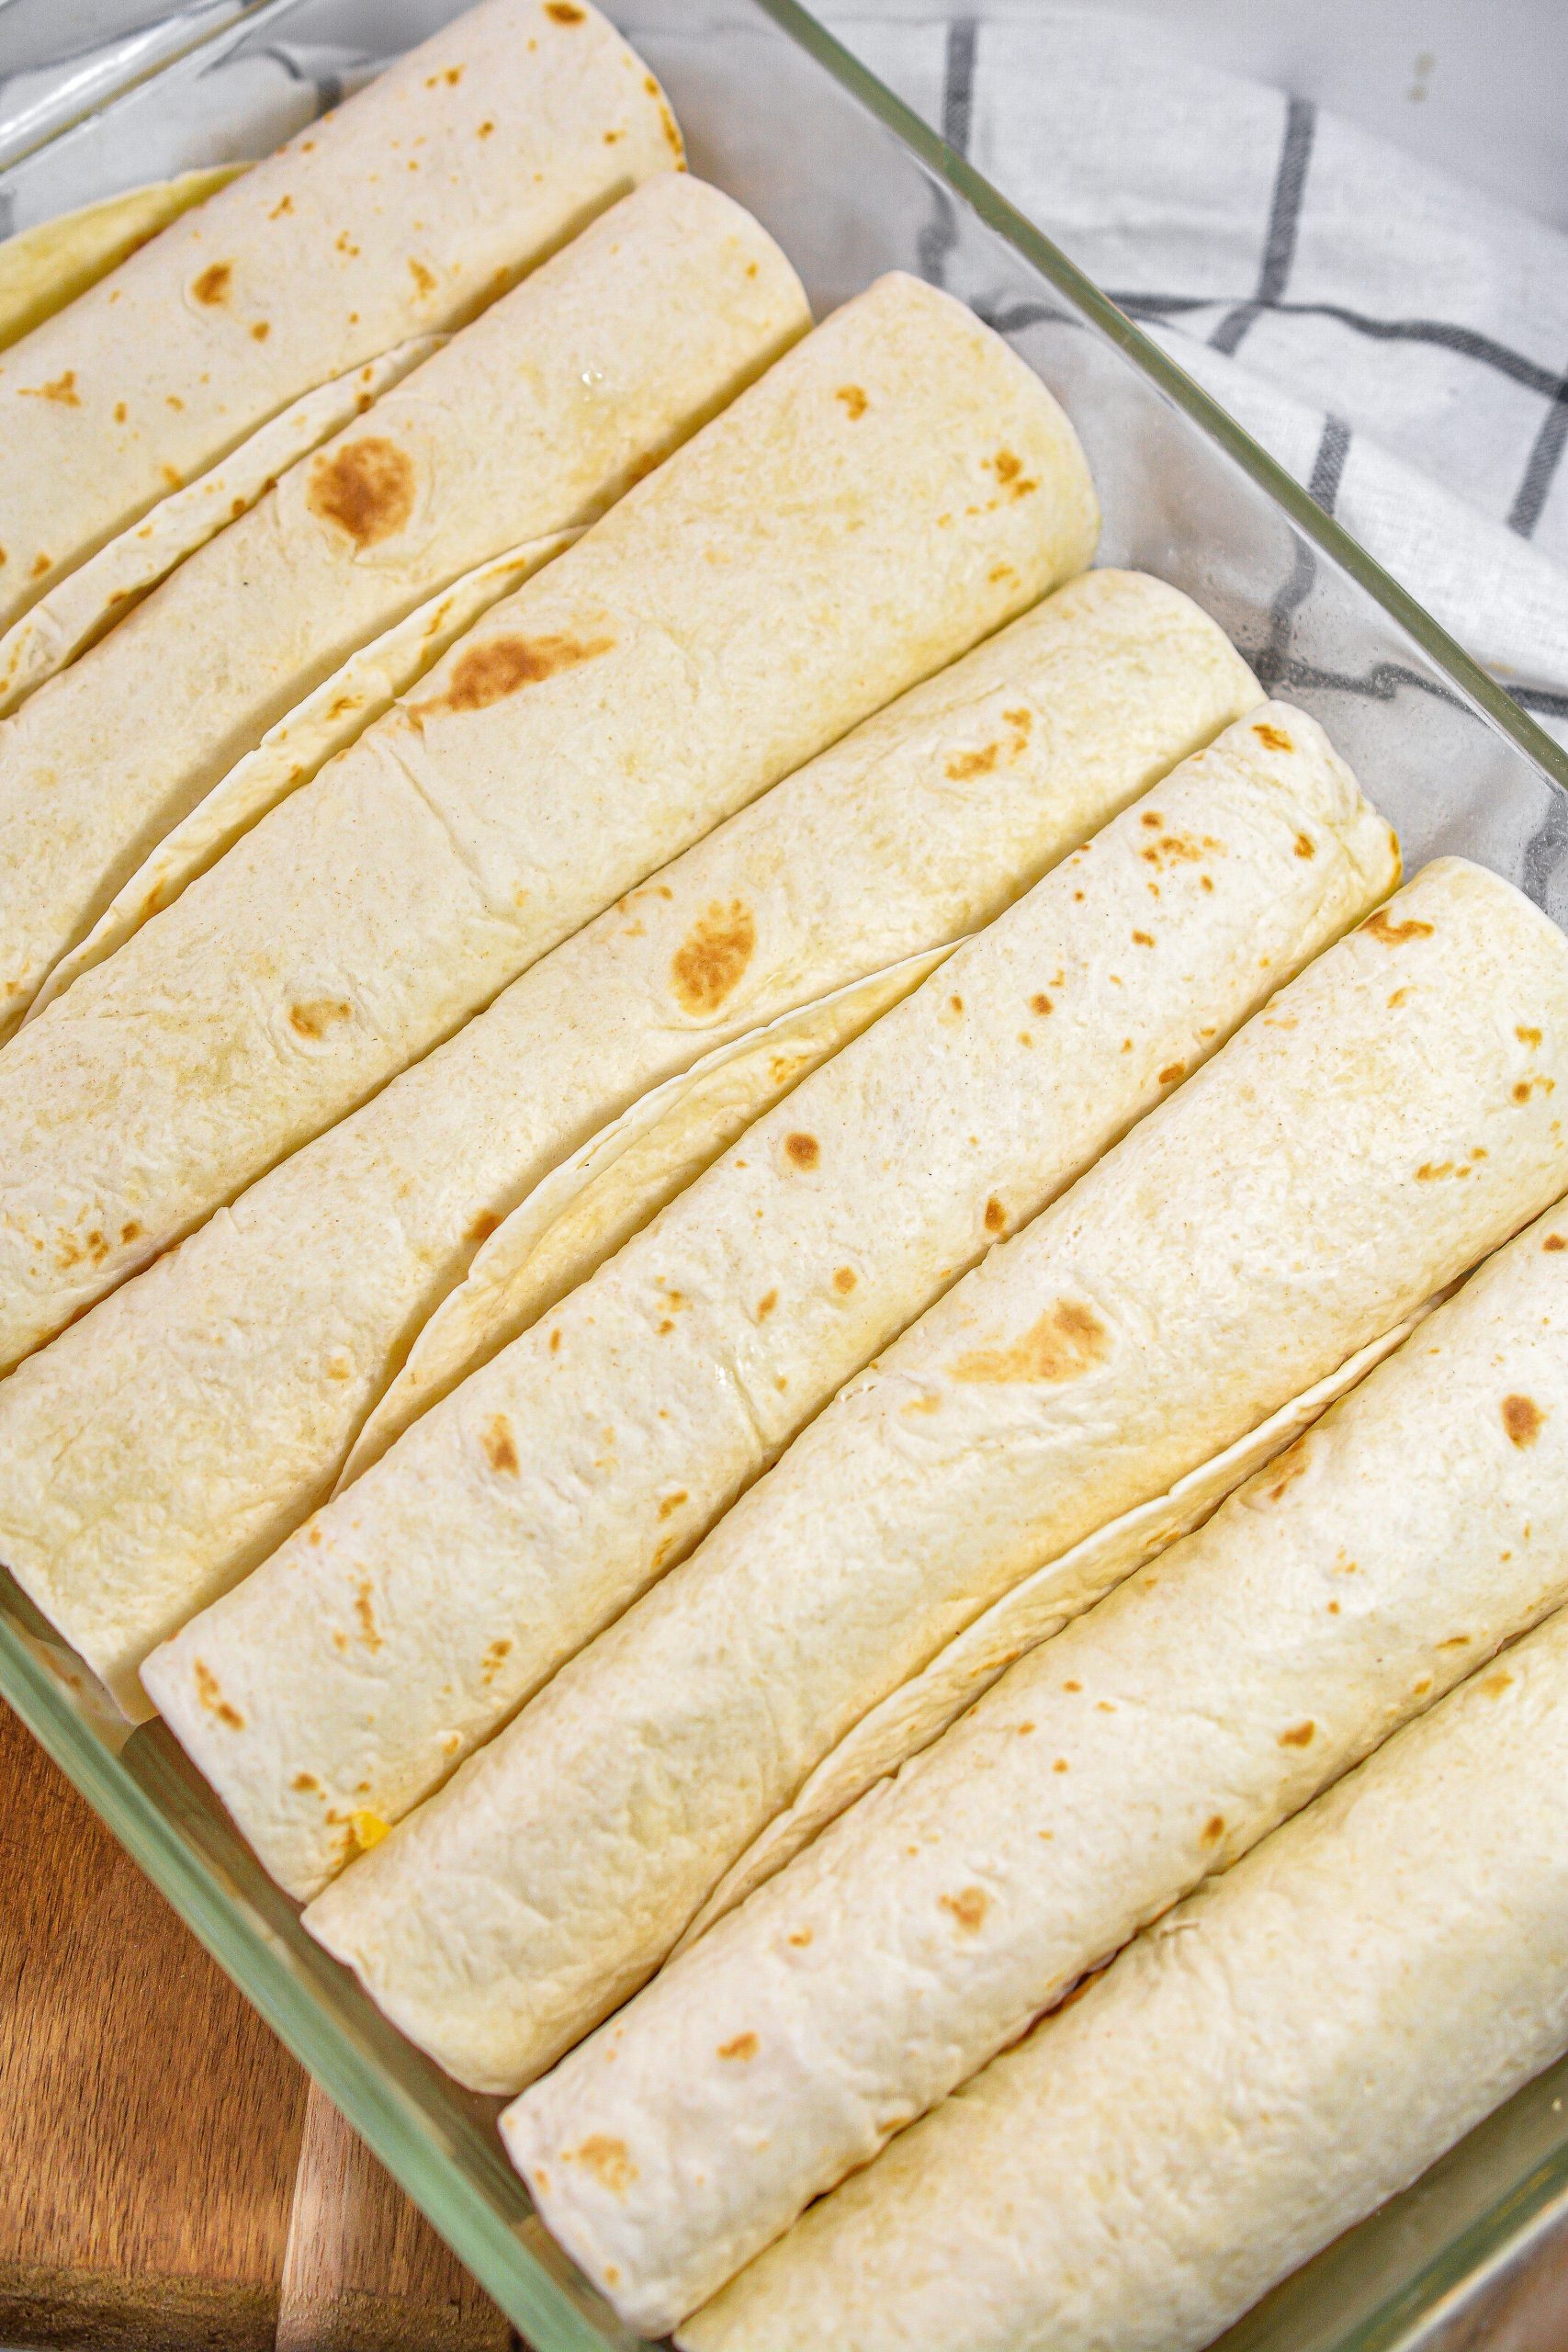 Fill the tortillas with the chicken mixture, and fold them closed. Line the filled tortillas in a 9x13 greased baking dish